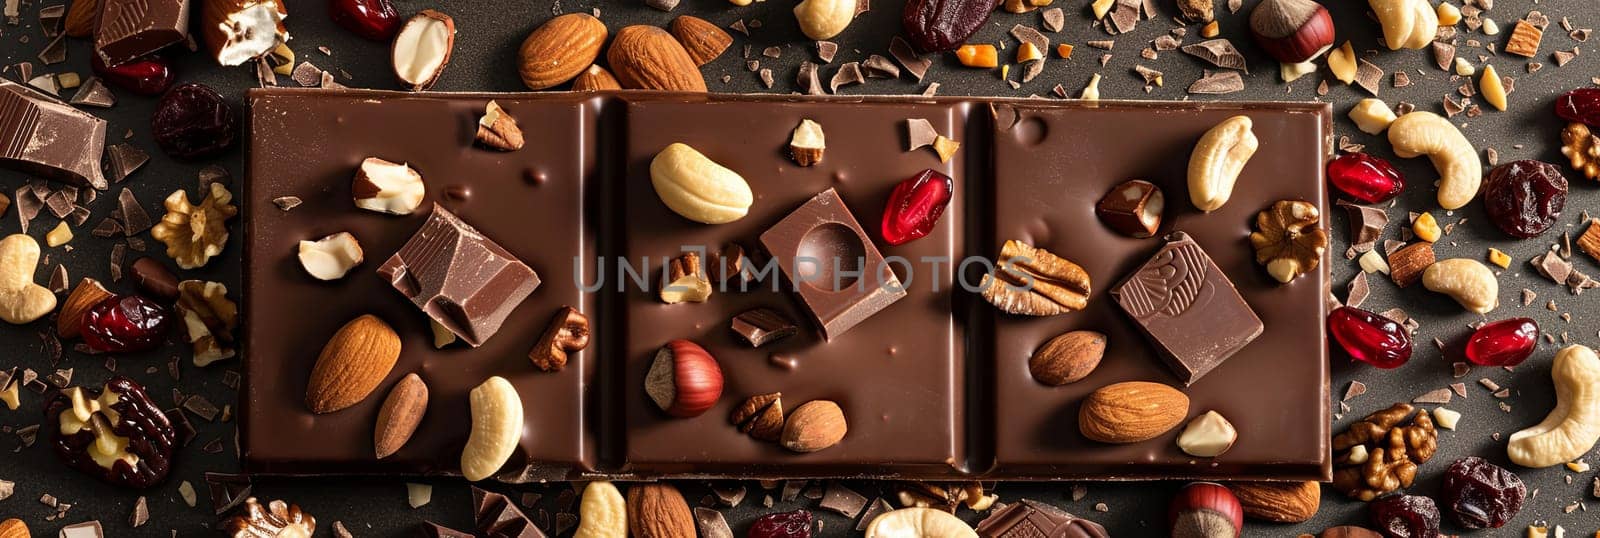 A chocolate bar topped with a mix of nuts, almonds, and cranberries in high detail, showcasing rich textures and a natural, appetizing appearance.